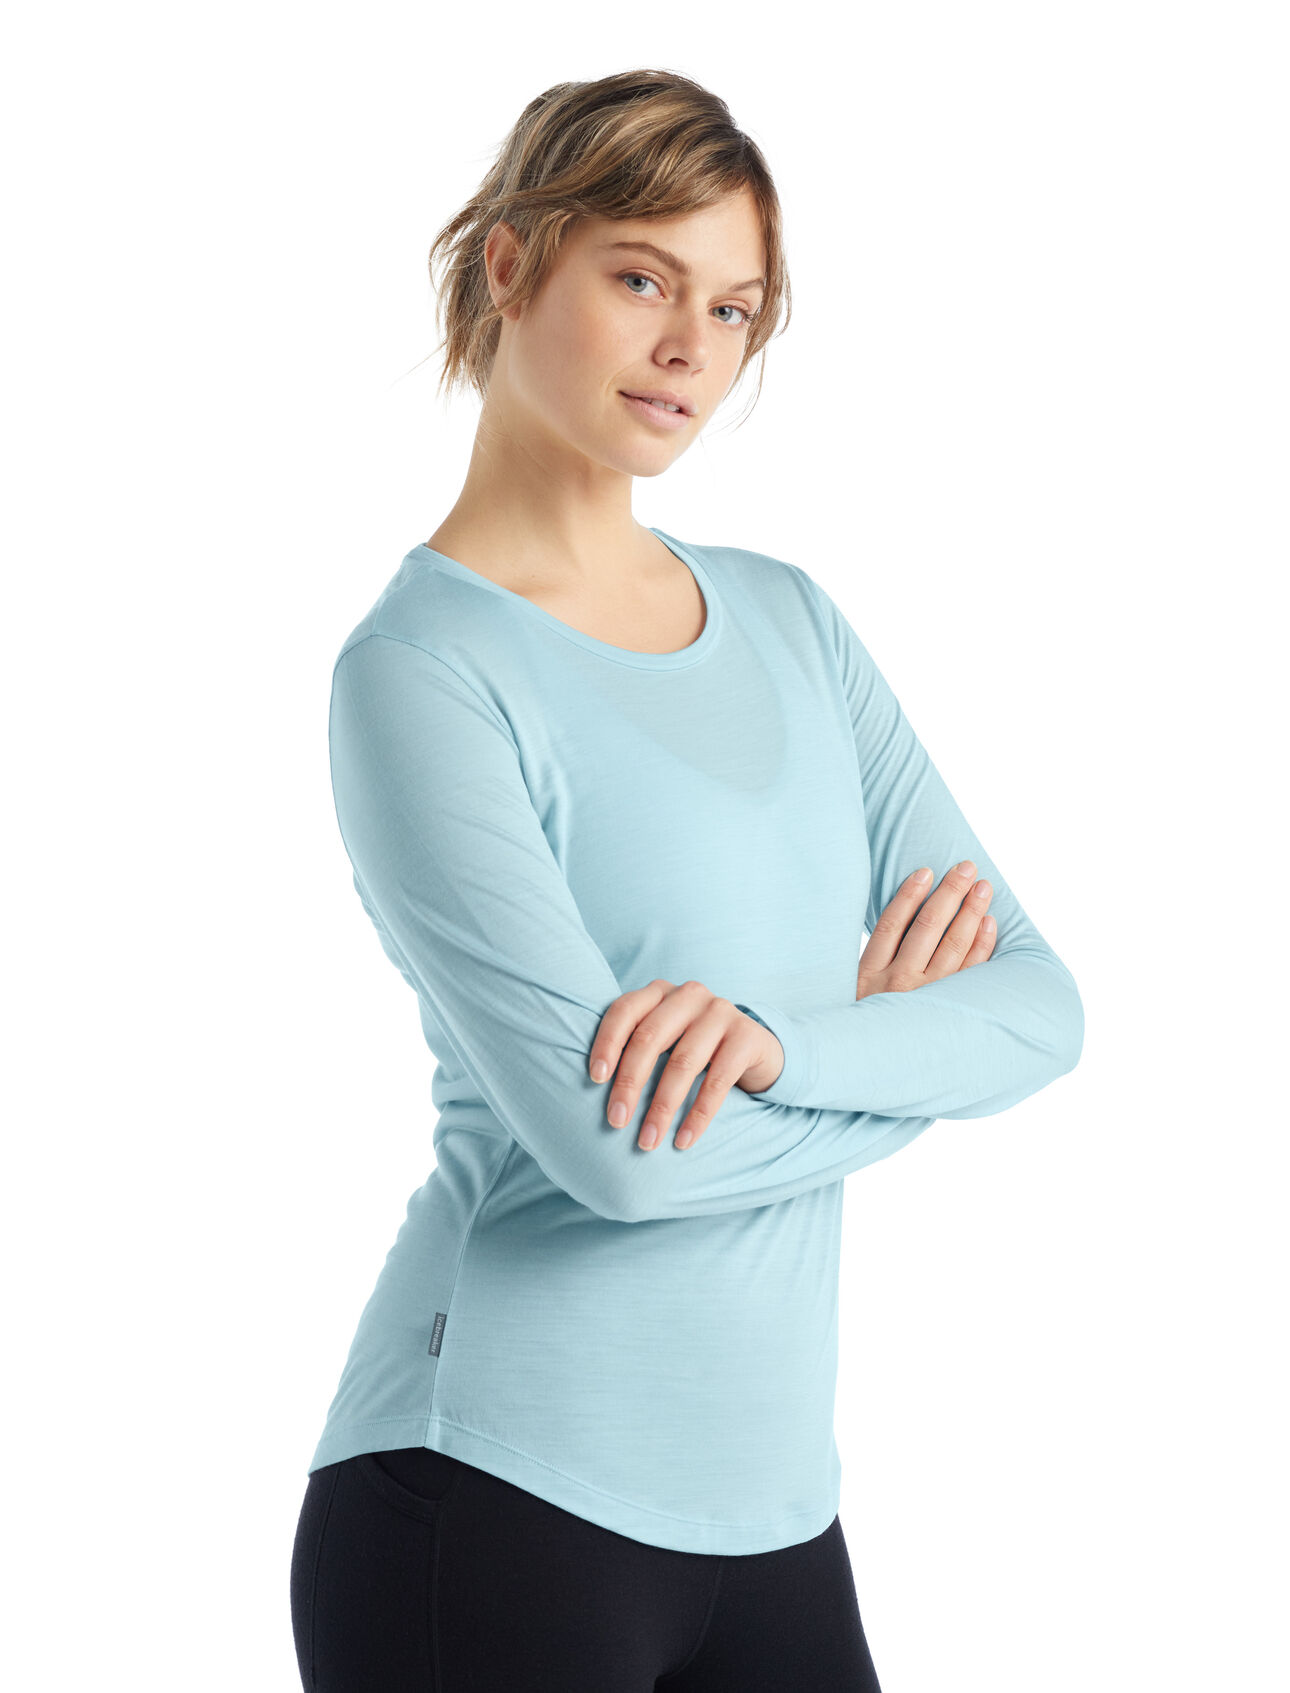 Womens Merino Sphere II Long Sleeve T-Shirt A soft merino-blend tee made with our lightweight Cool-Lite™ jersey fabric, the Sphere II Long Sleeve Tee provides natural breathability, odor resistance and comfort.